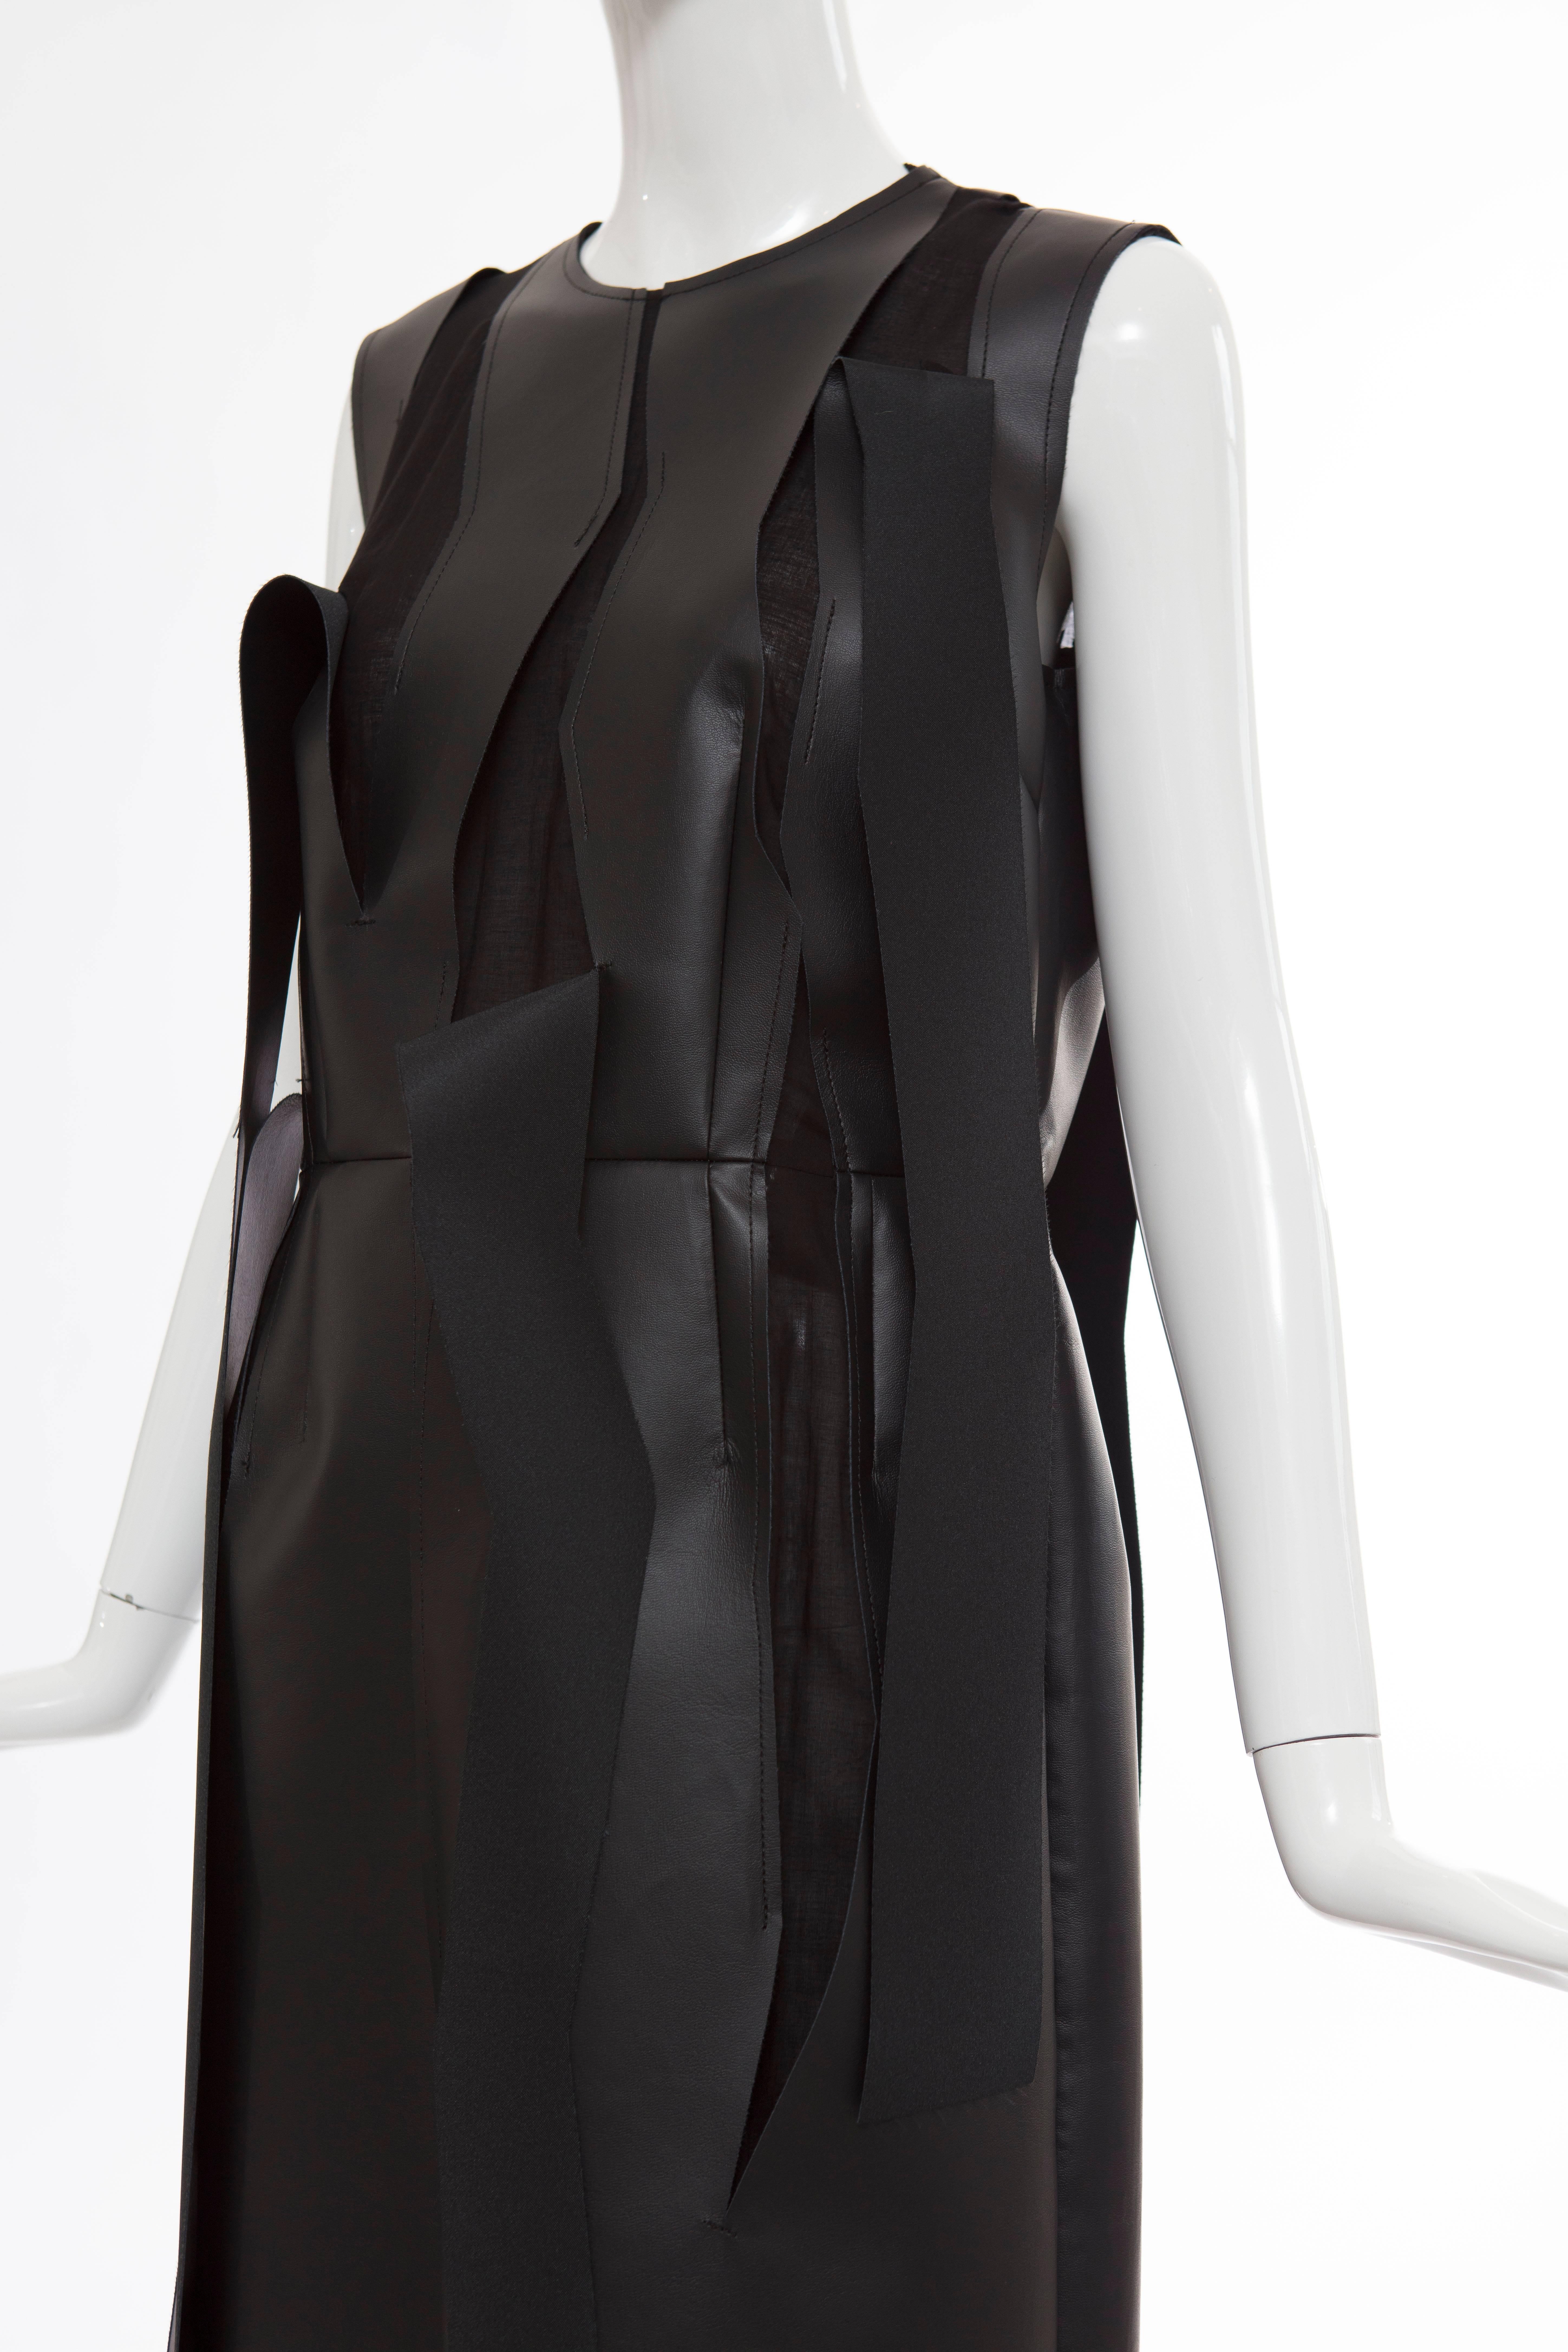 Comme des Garcons Black Synthetic Leather With Cutout Strips Dress, Circa 2014 2